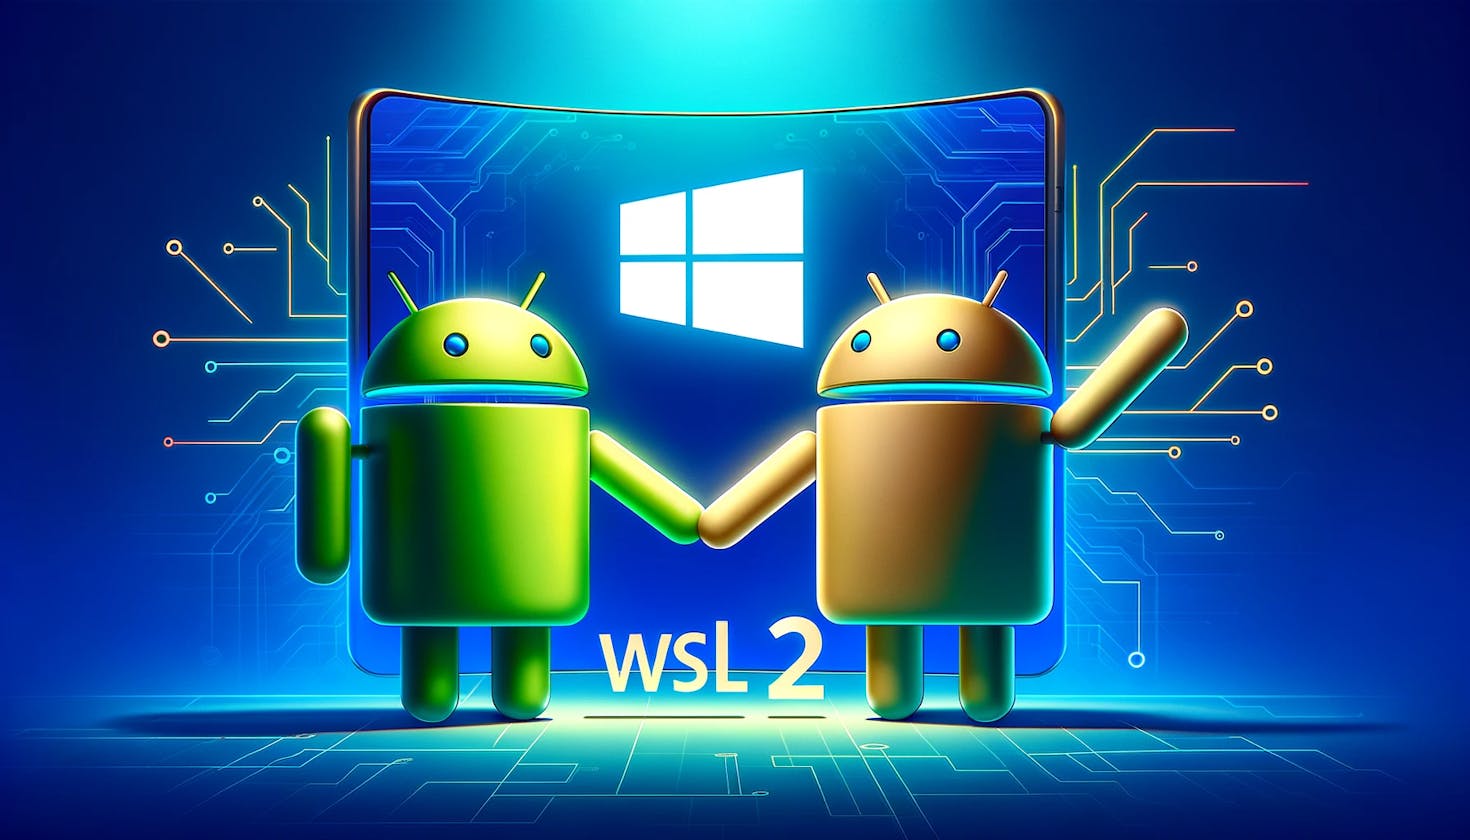 Setting Up Android Development Environment on WSL 2